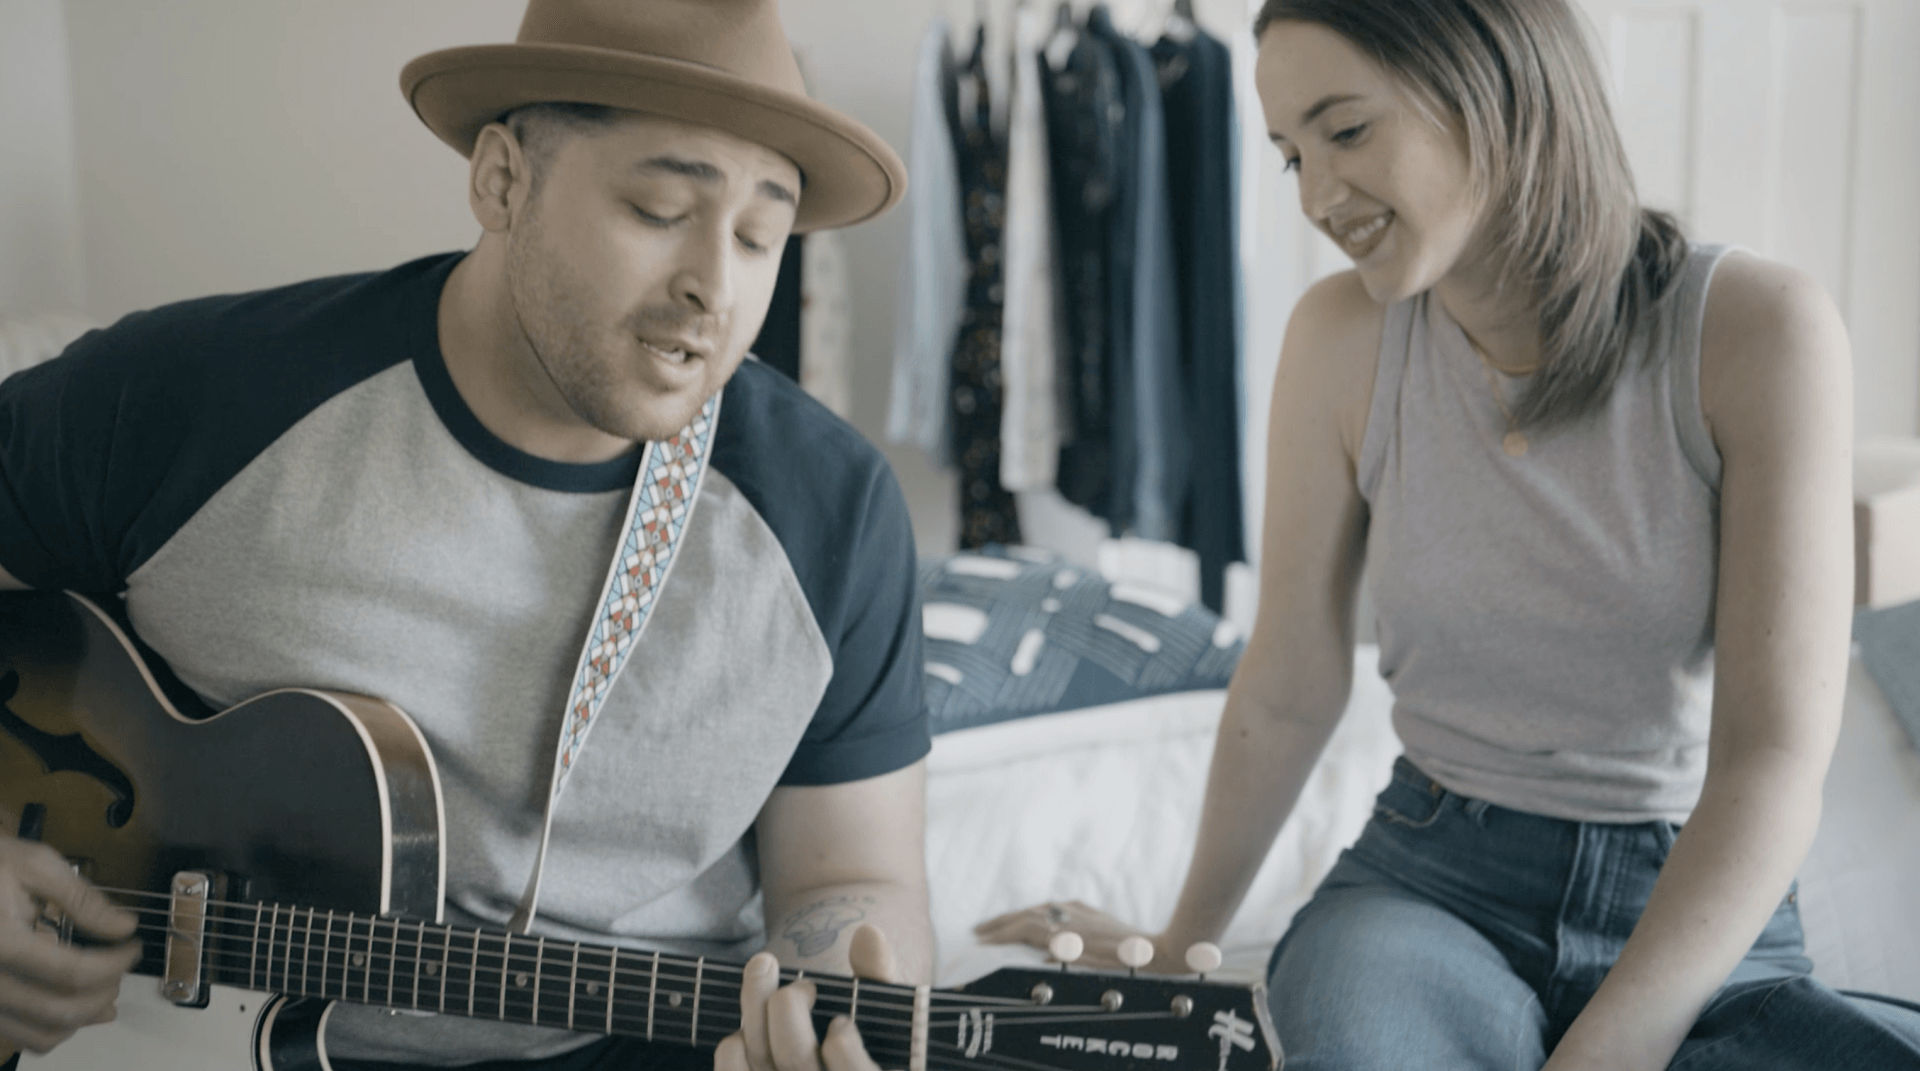 Man plays guitar in bedroom as girlfriend listens and looks at him playing